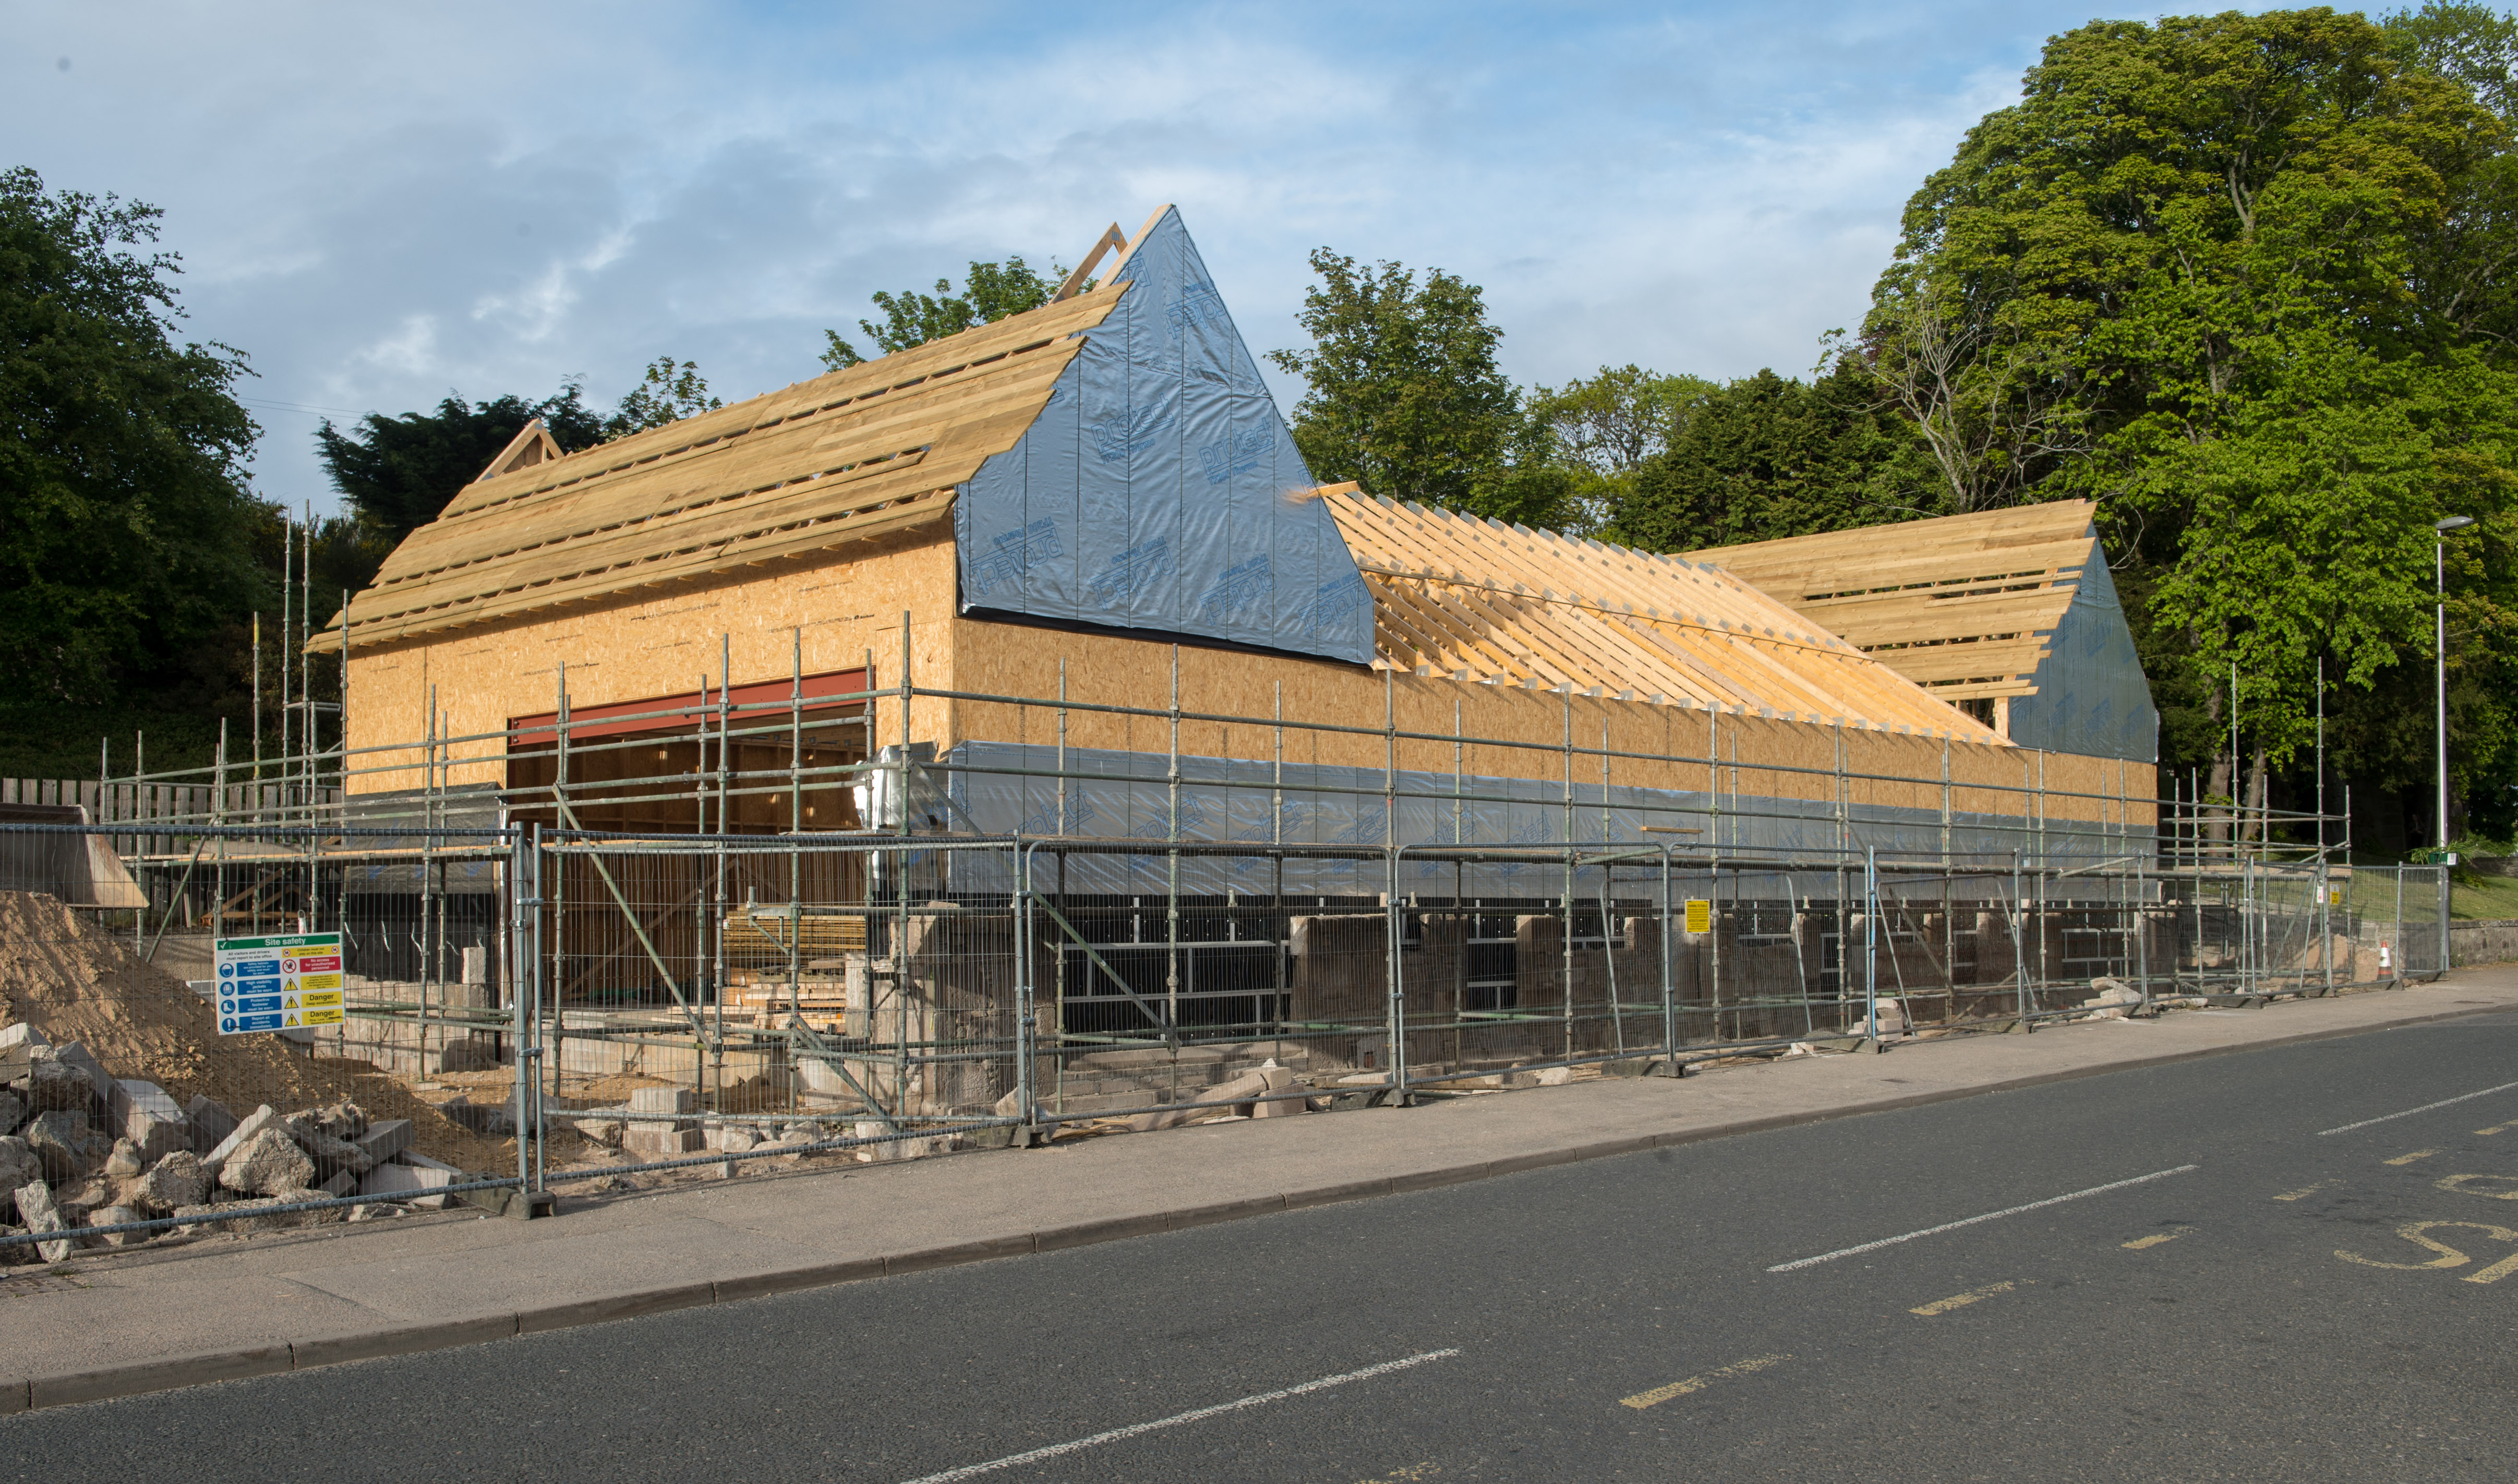 The new structure of Co-op in Lhanbryde in moray.